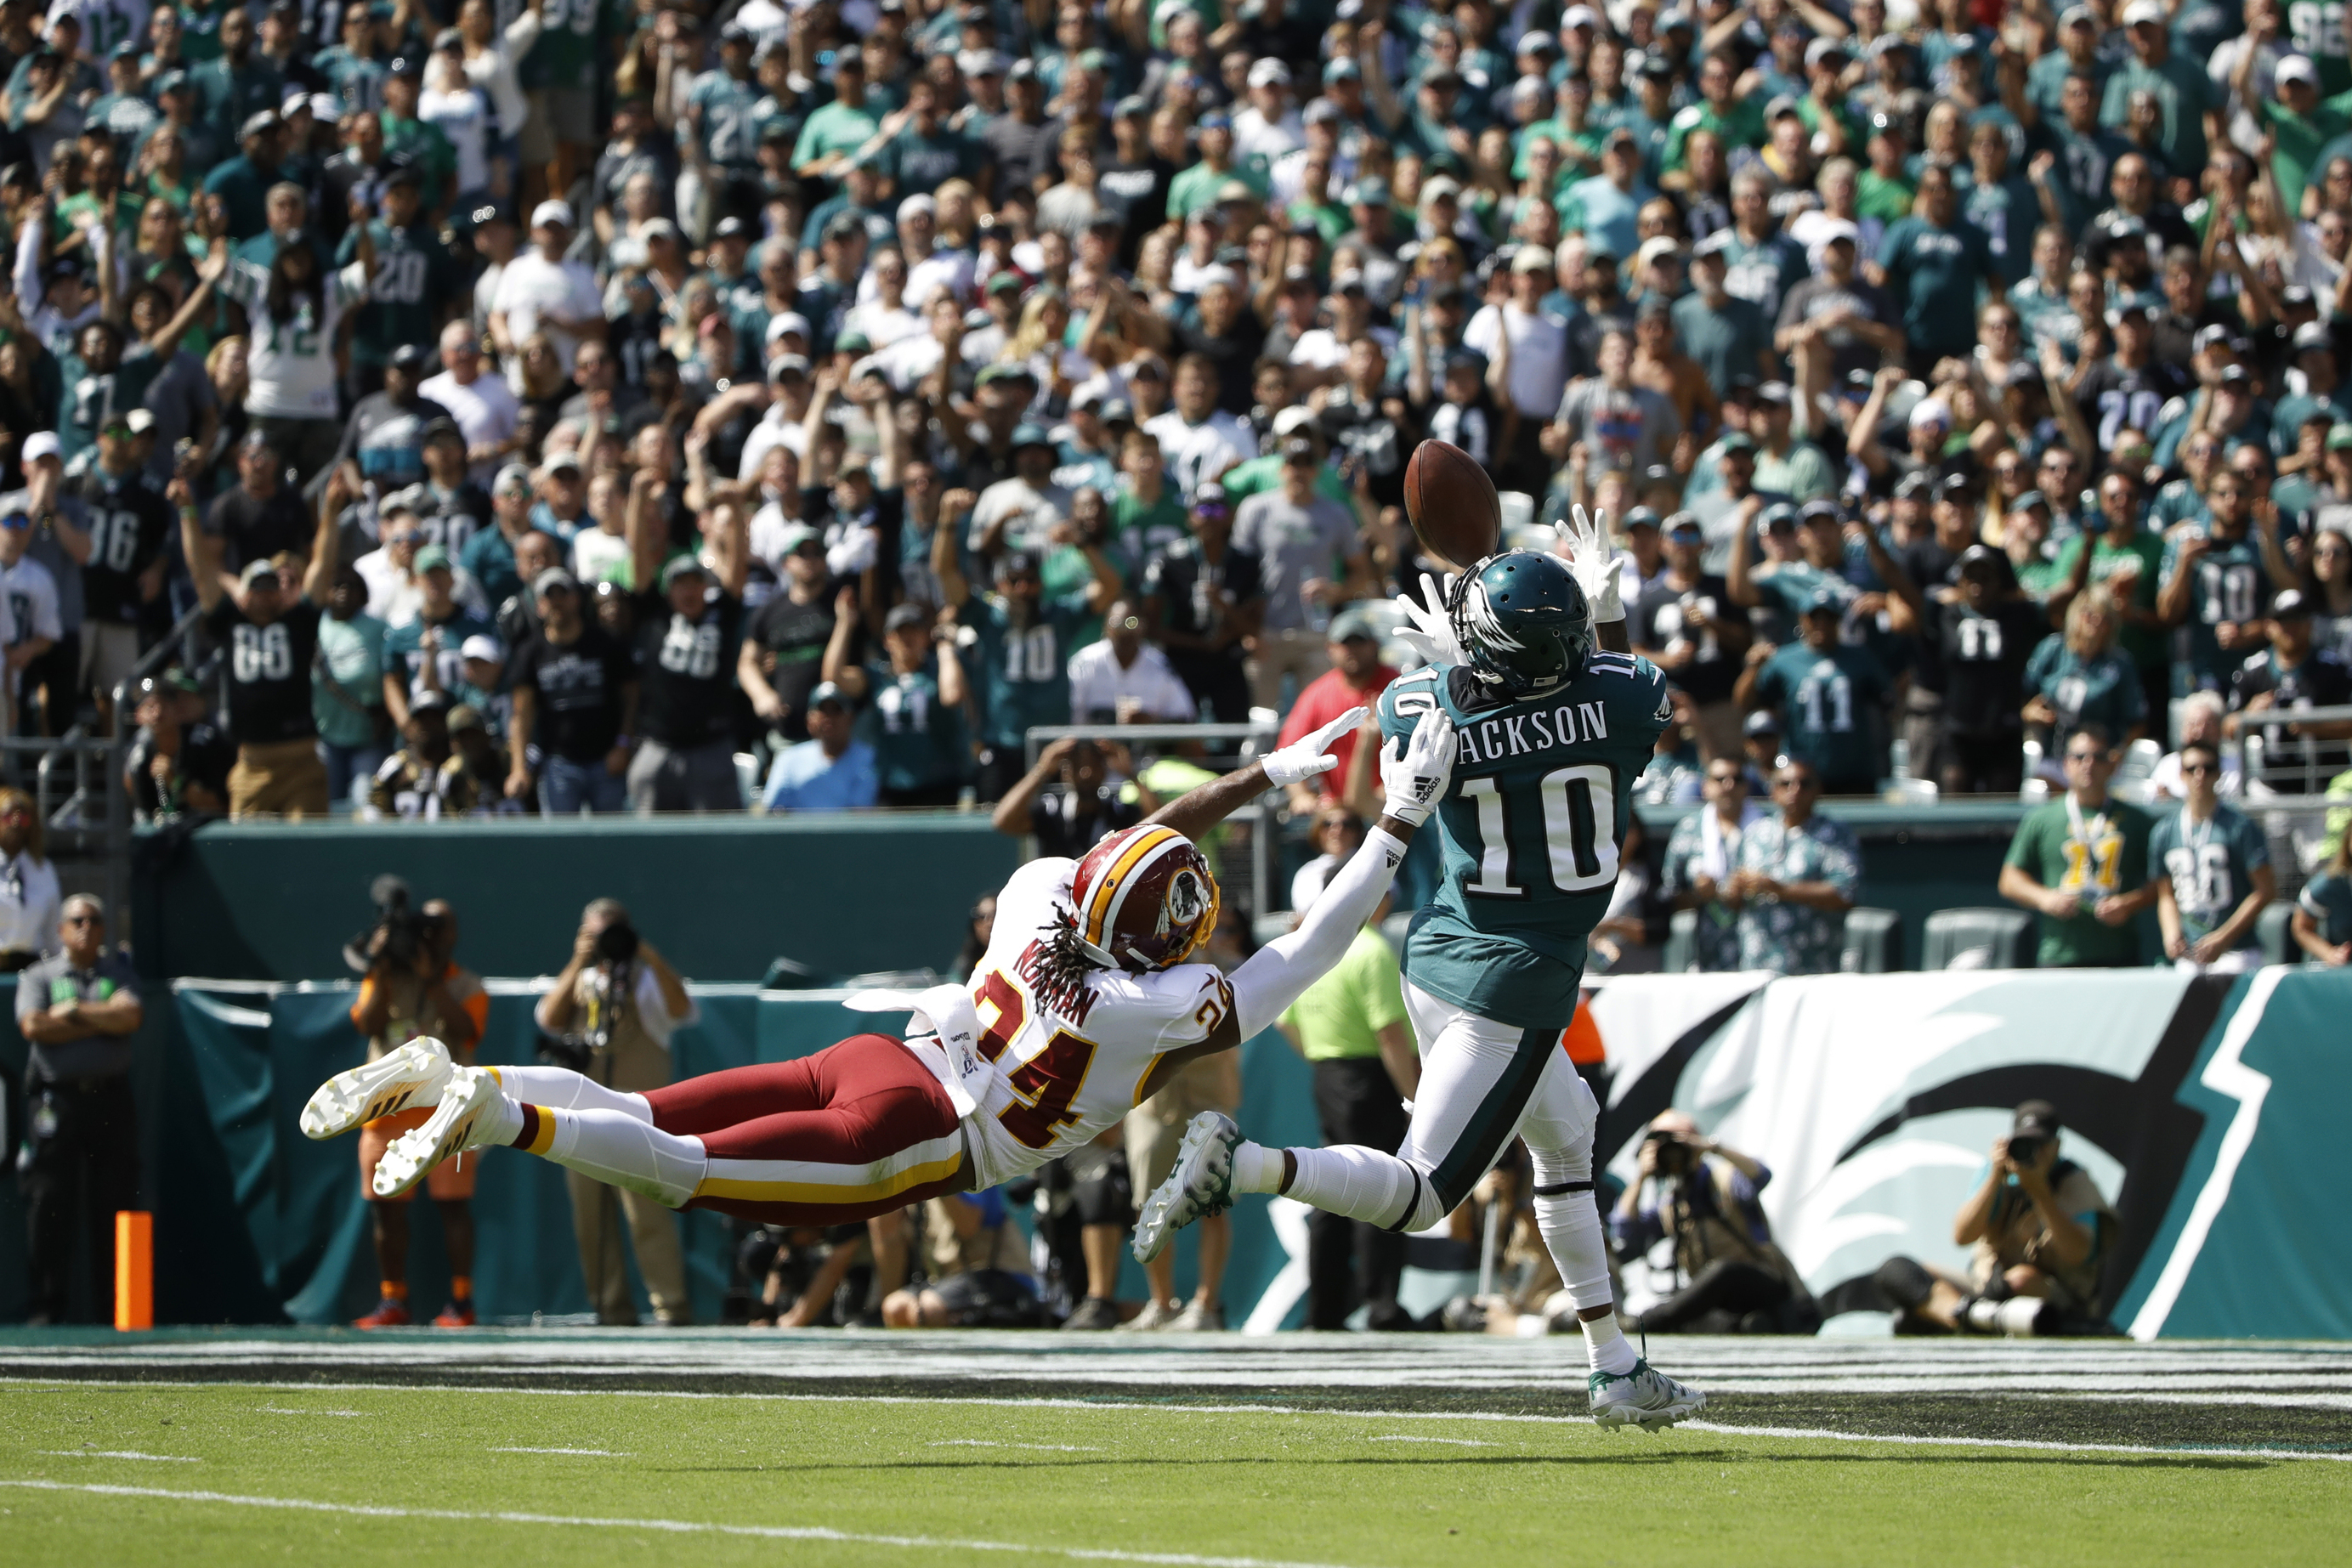 Jackson shines in Philly return, Eagles beat Redskins 32-27